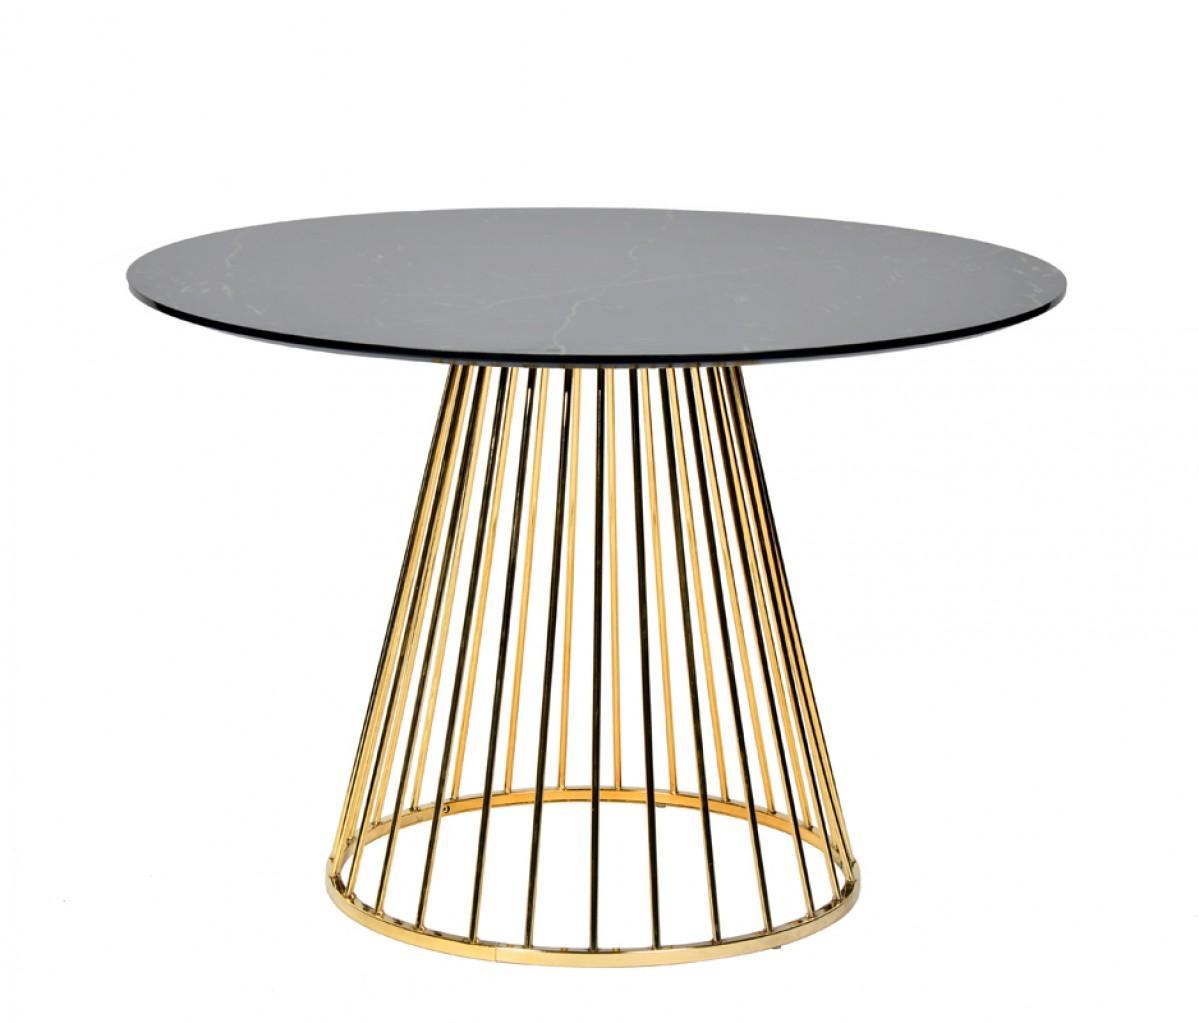 Contemporary, Modern Dining Table Holly VGFH-FDT7012-BLK in Gold, Black 